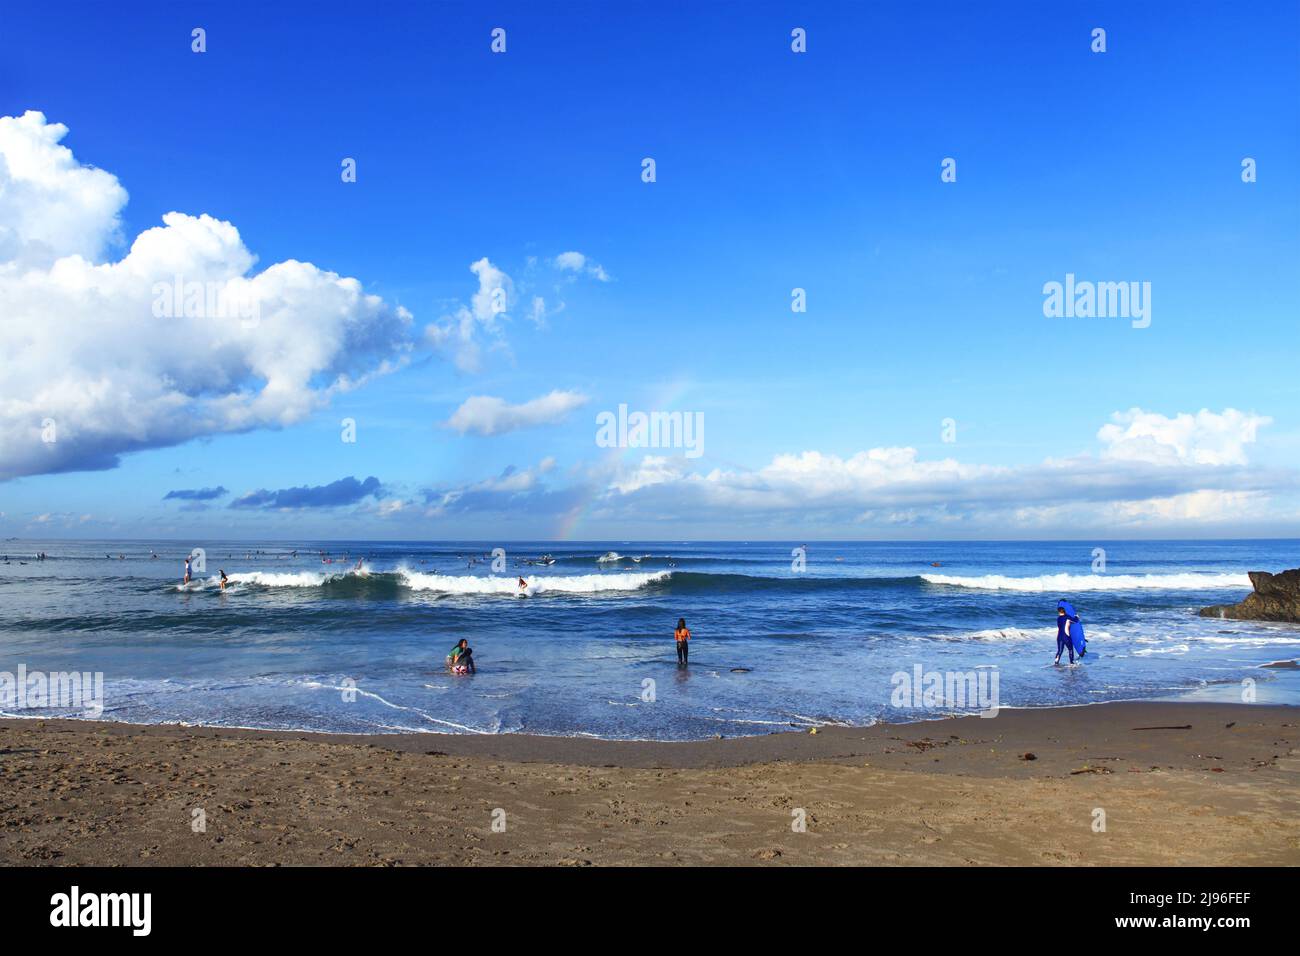 Surfers Riding Waves with a Rainbow on the horizon at Batu Bolong Beach in Canggu, Bali, Indonesia Stock Photo